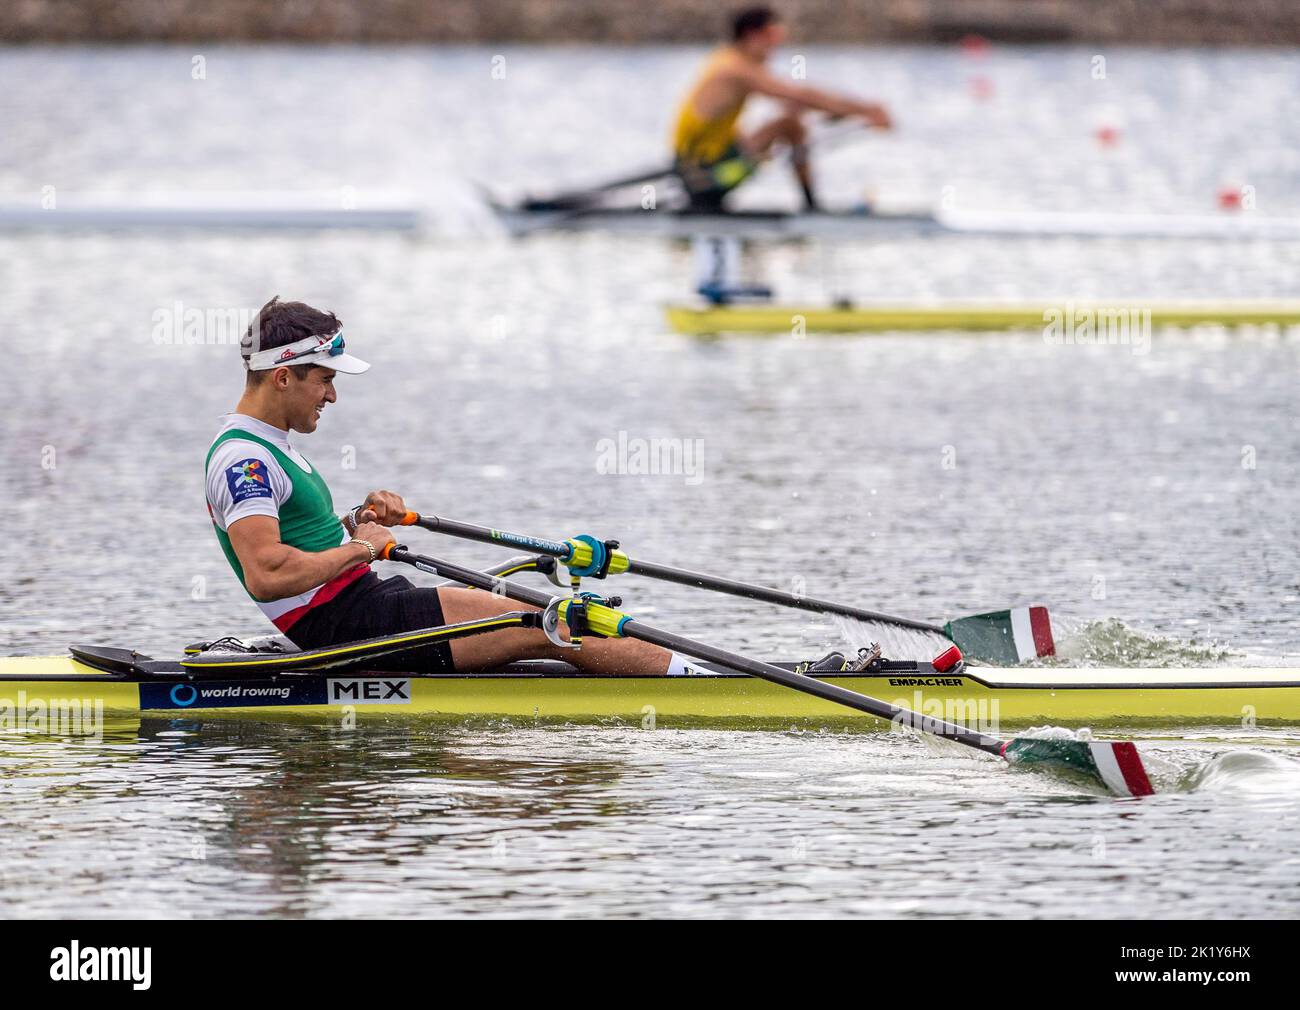 Racice, Czech Republic. 21st Sep, 2022. Alexis Bladimir Lopez Garcia of Mexico competing during Day 4 of the 2022 World Rowing Championships at the Labe Arena Racice on September 21, 2022 in Racice, Czech Republic. Credit: Ondrej Hajek/CTK Photo/Alamy Live News Stock Photo